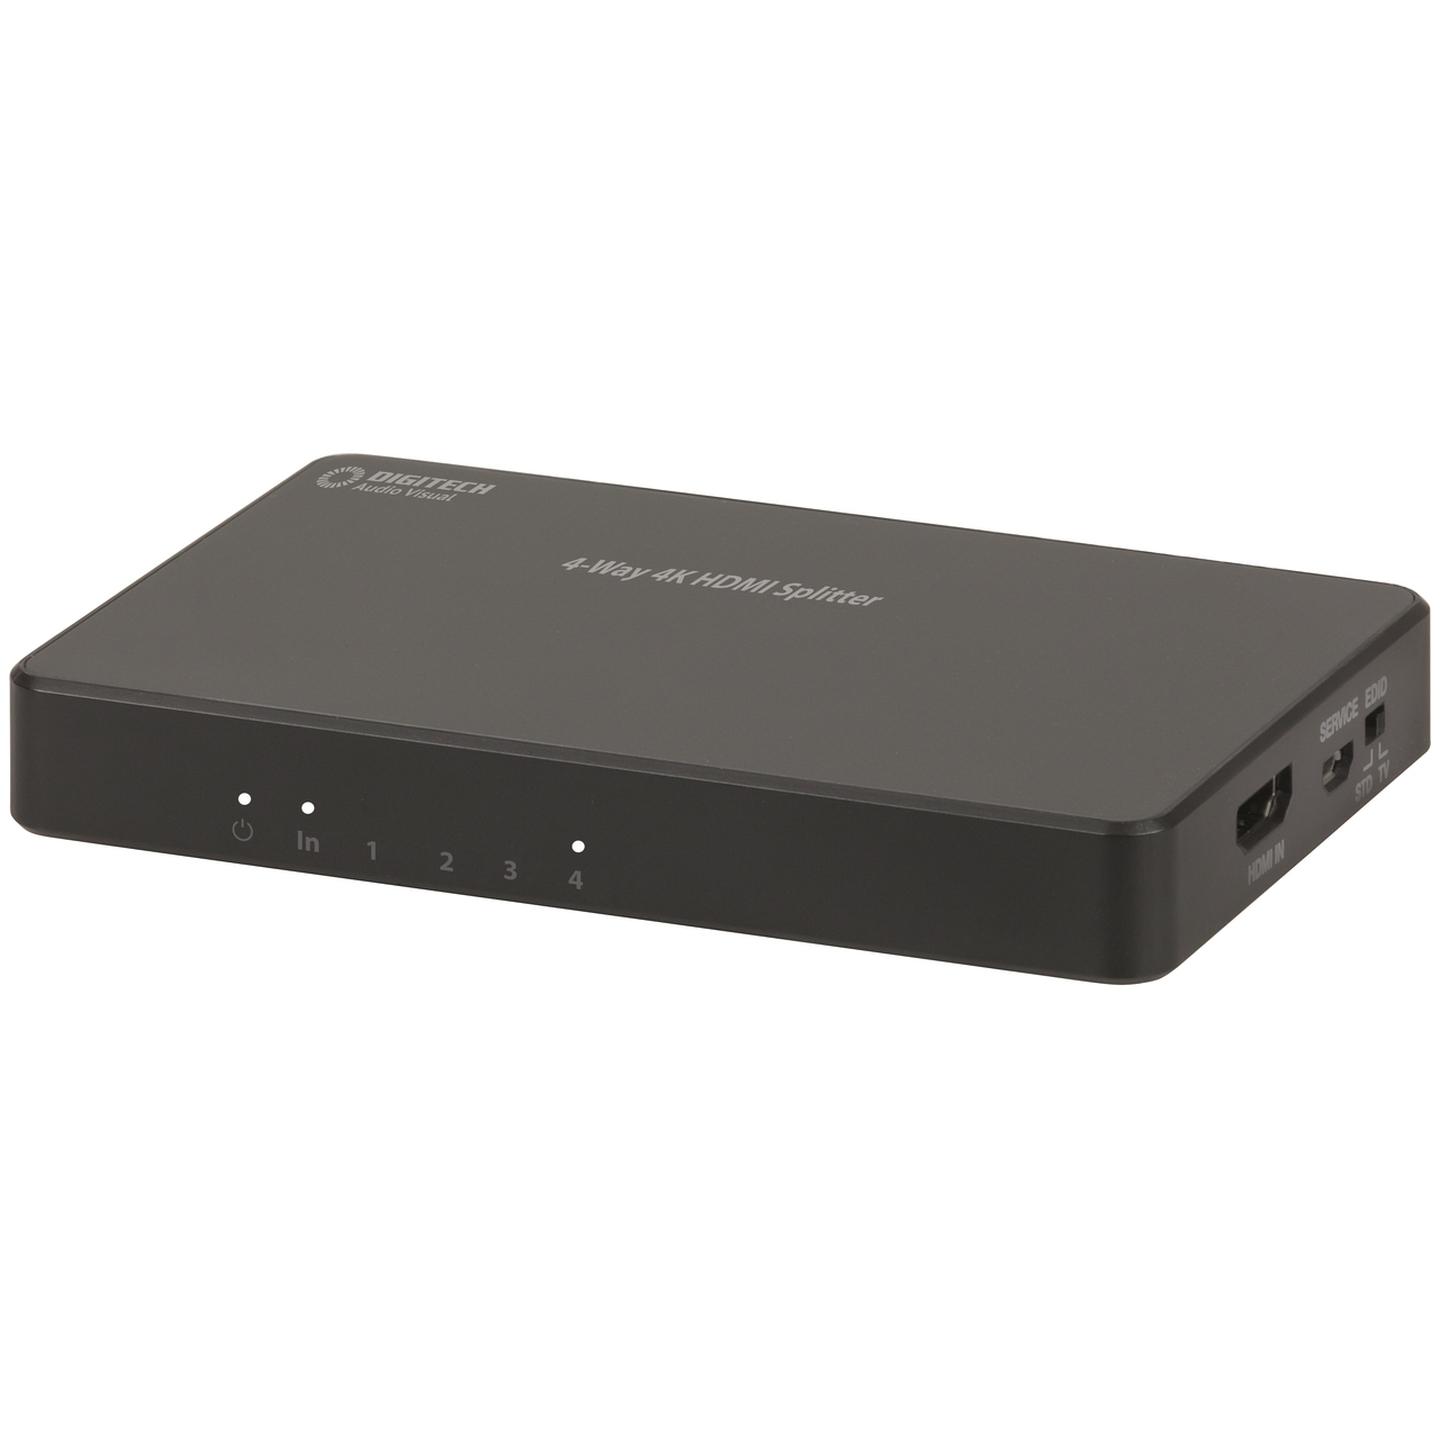 4-Way HDMI Splitter with 4K UHD and HDR Support